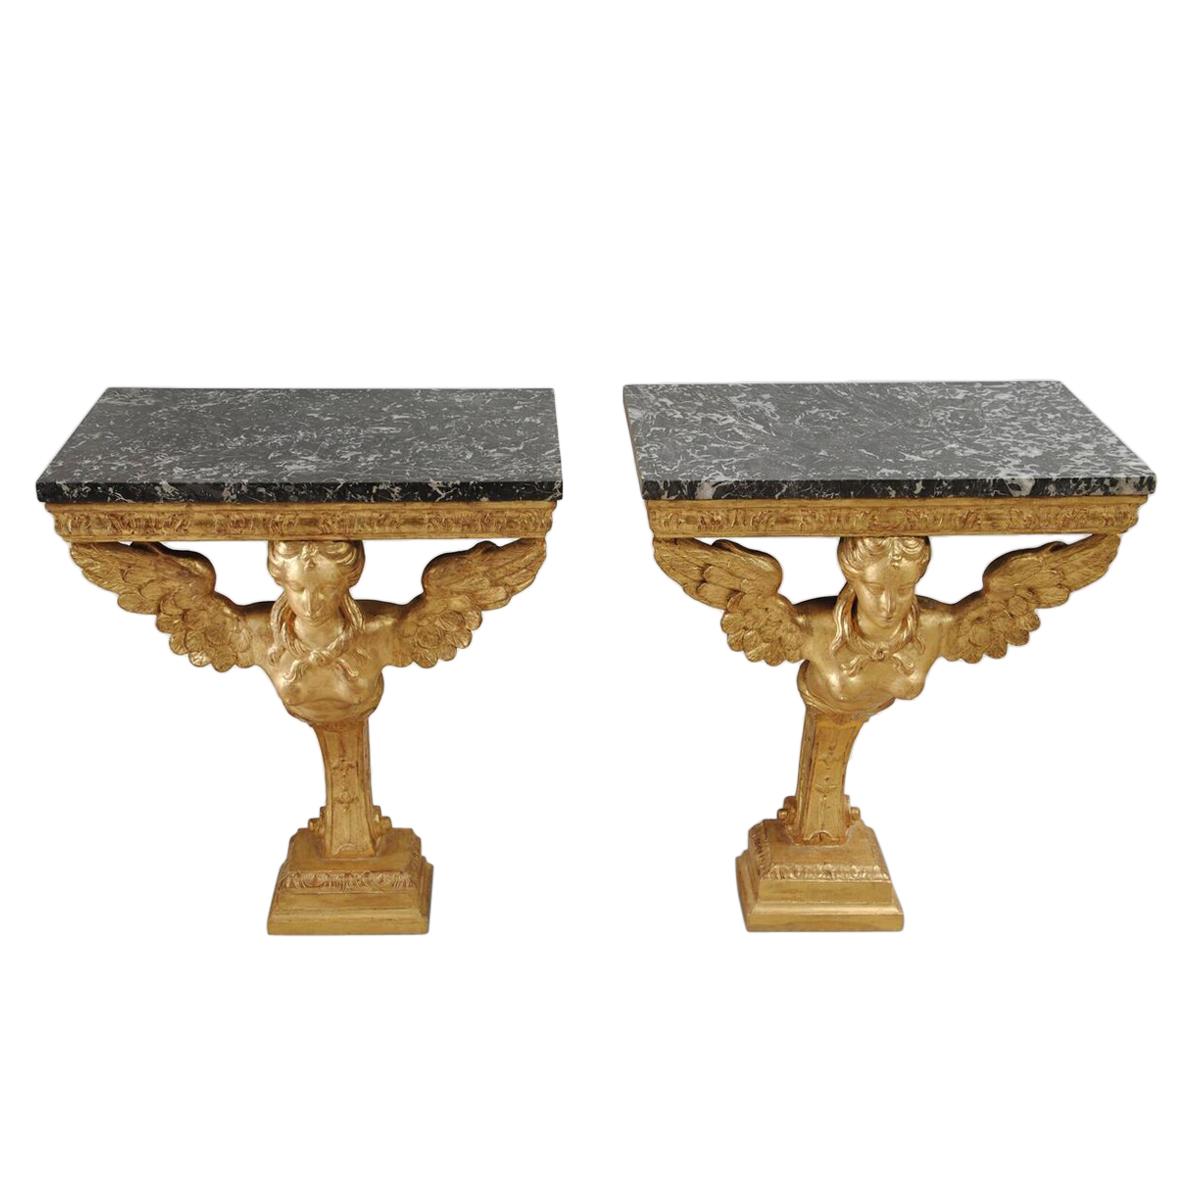 Pair of Elegant 18th Century Carved Giltwood Console Tables